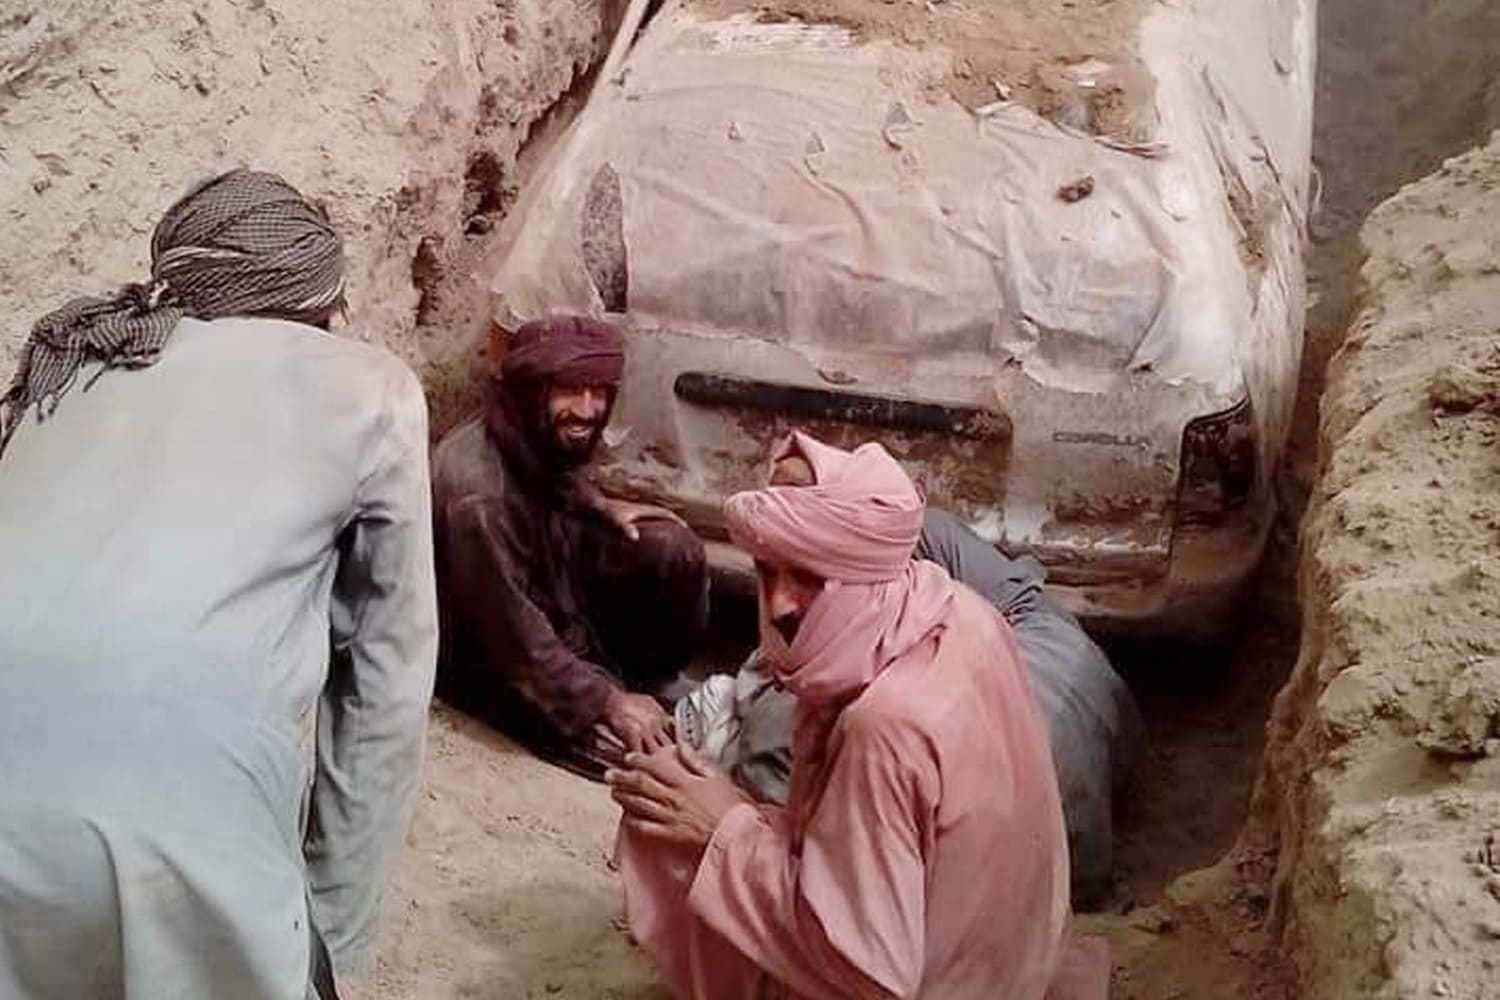 Taliban excavate car used by founding leader to escape after U.S.-led invasion